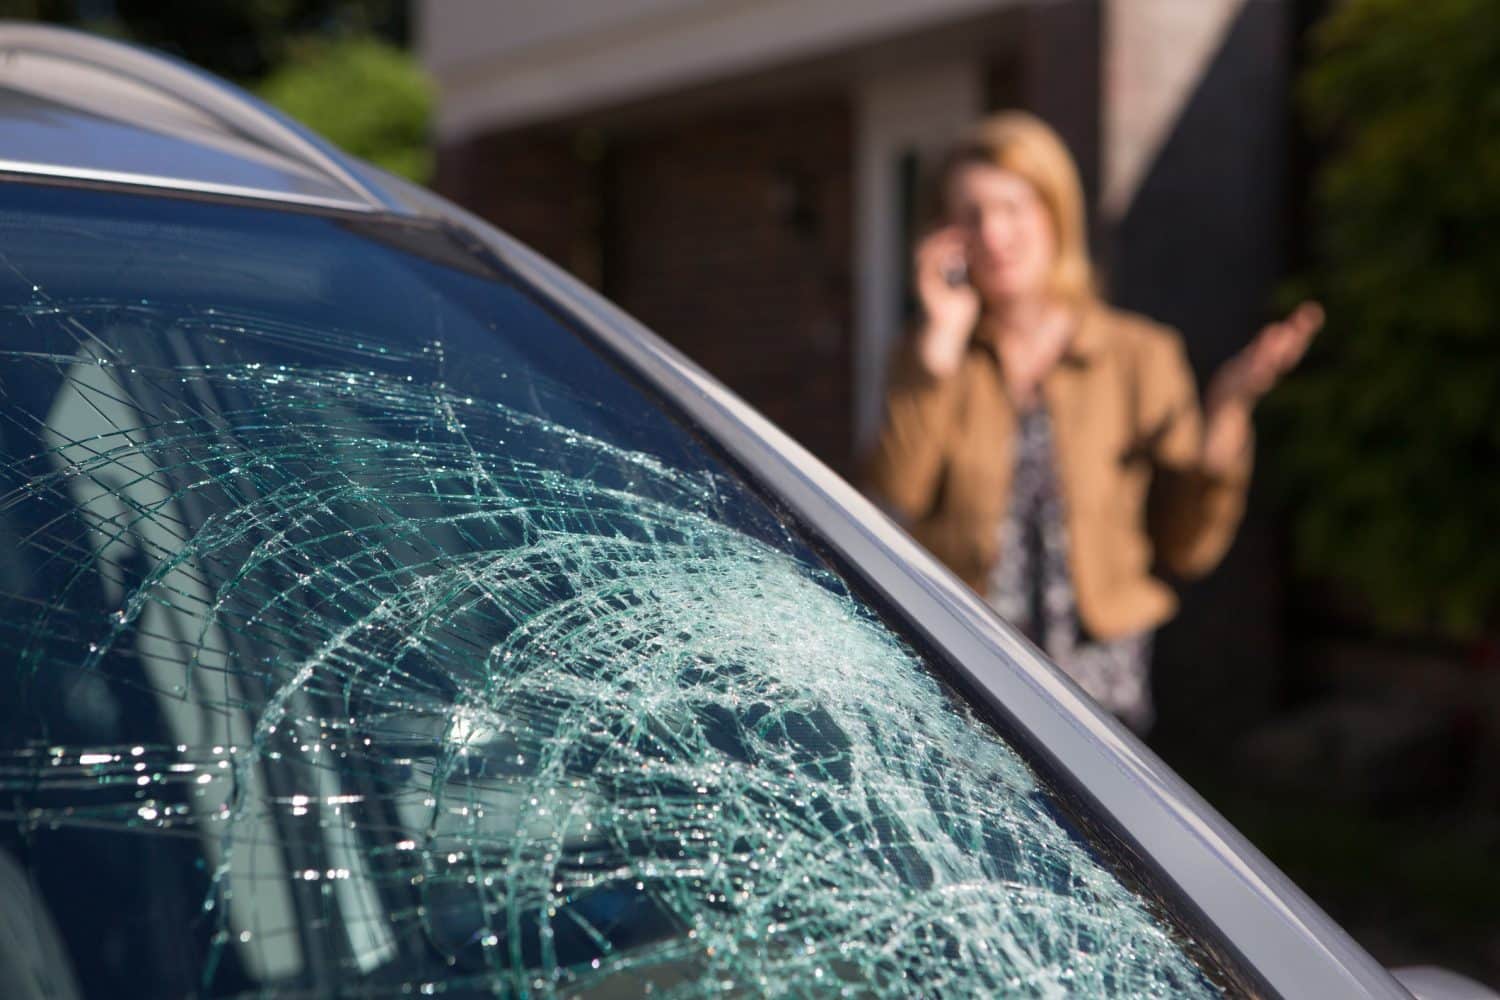 A broken windshield after a car accident.